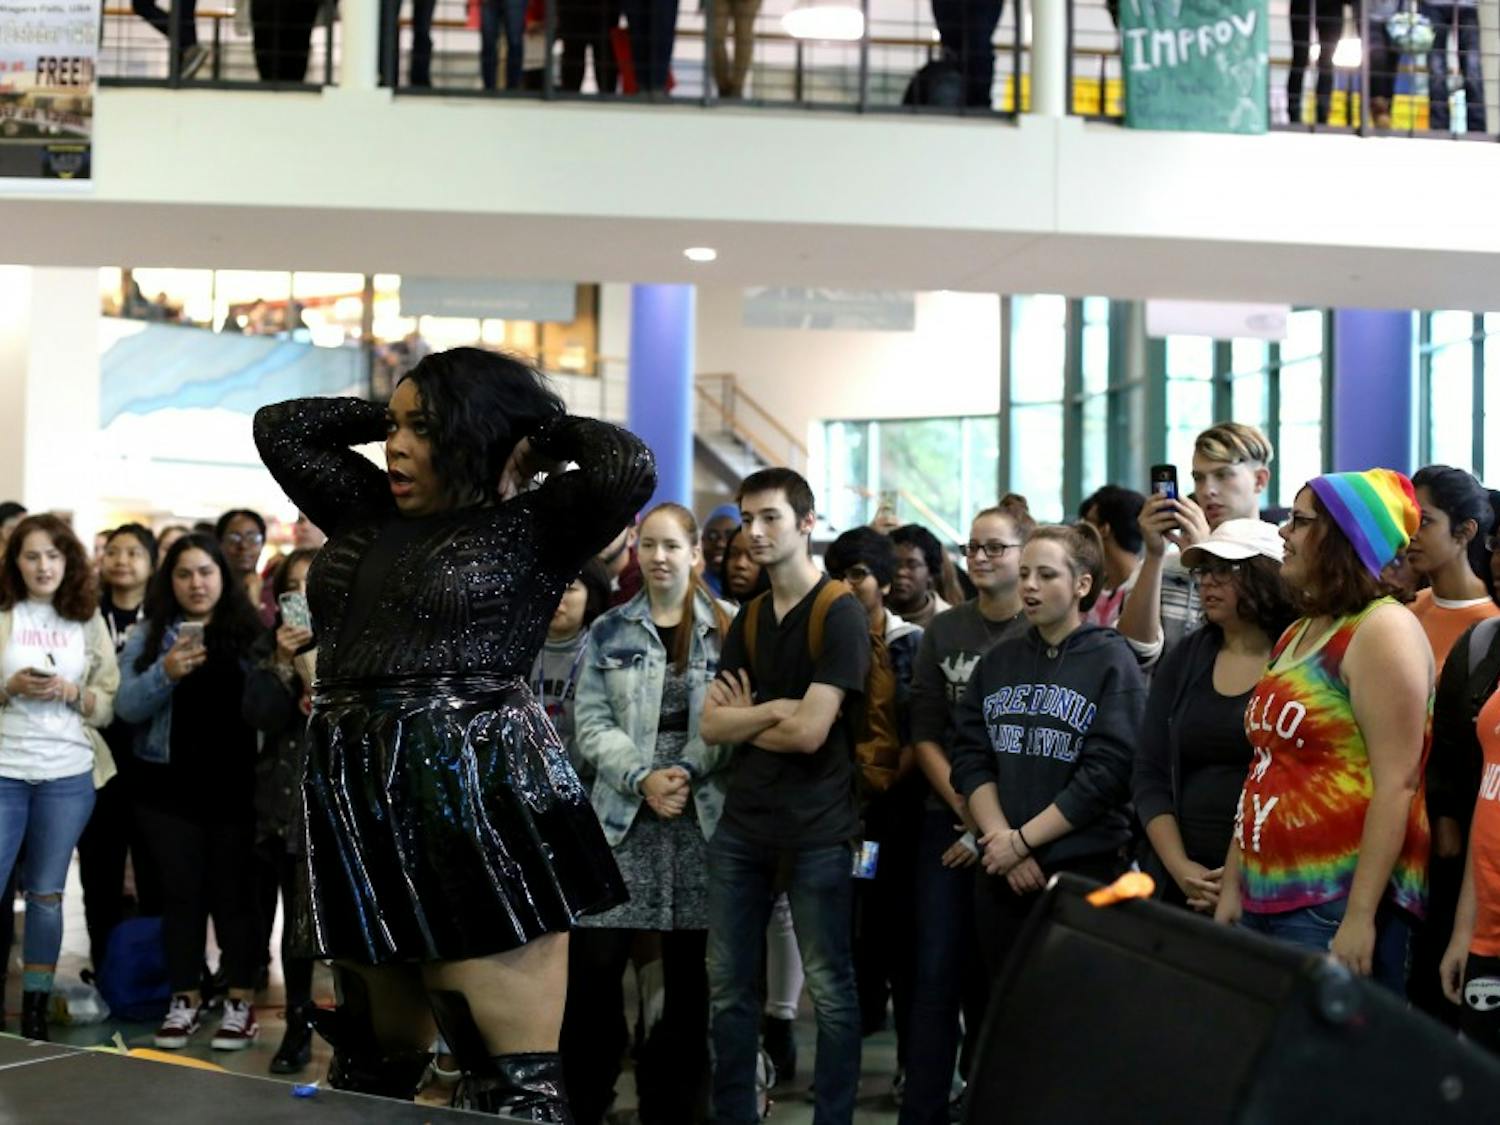 The LGBTA and IDC held their annual drag show on National Coming Out Day. Students passing through the SU curiously and eagerly watched the dancers' routines.